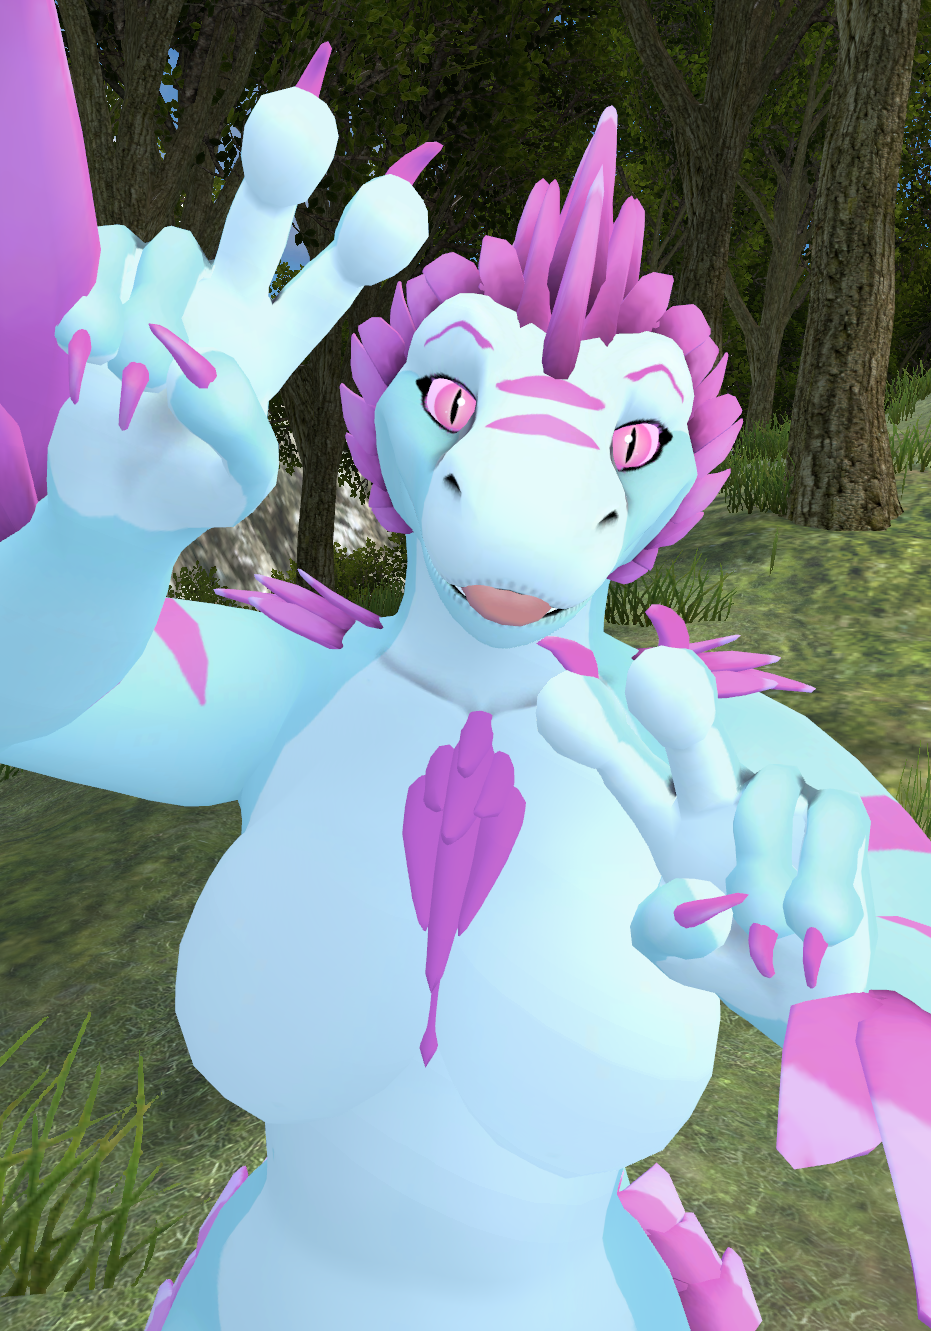 A screen shot from VRchat of my fursona Aurora in a forest smiling